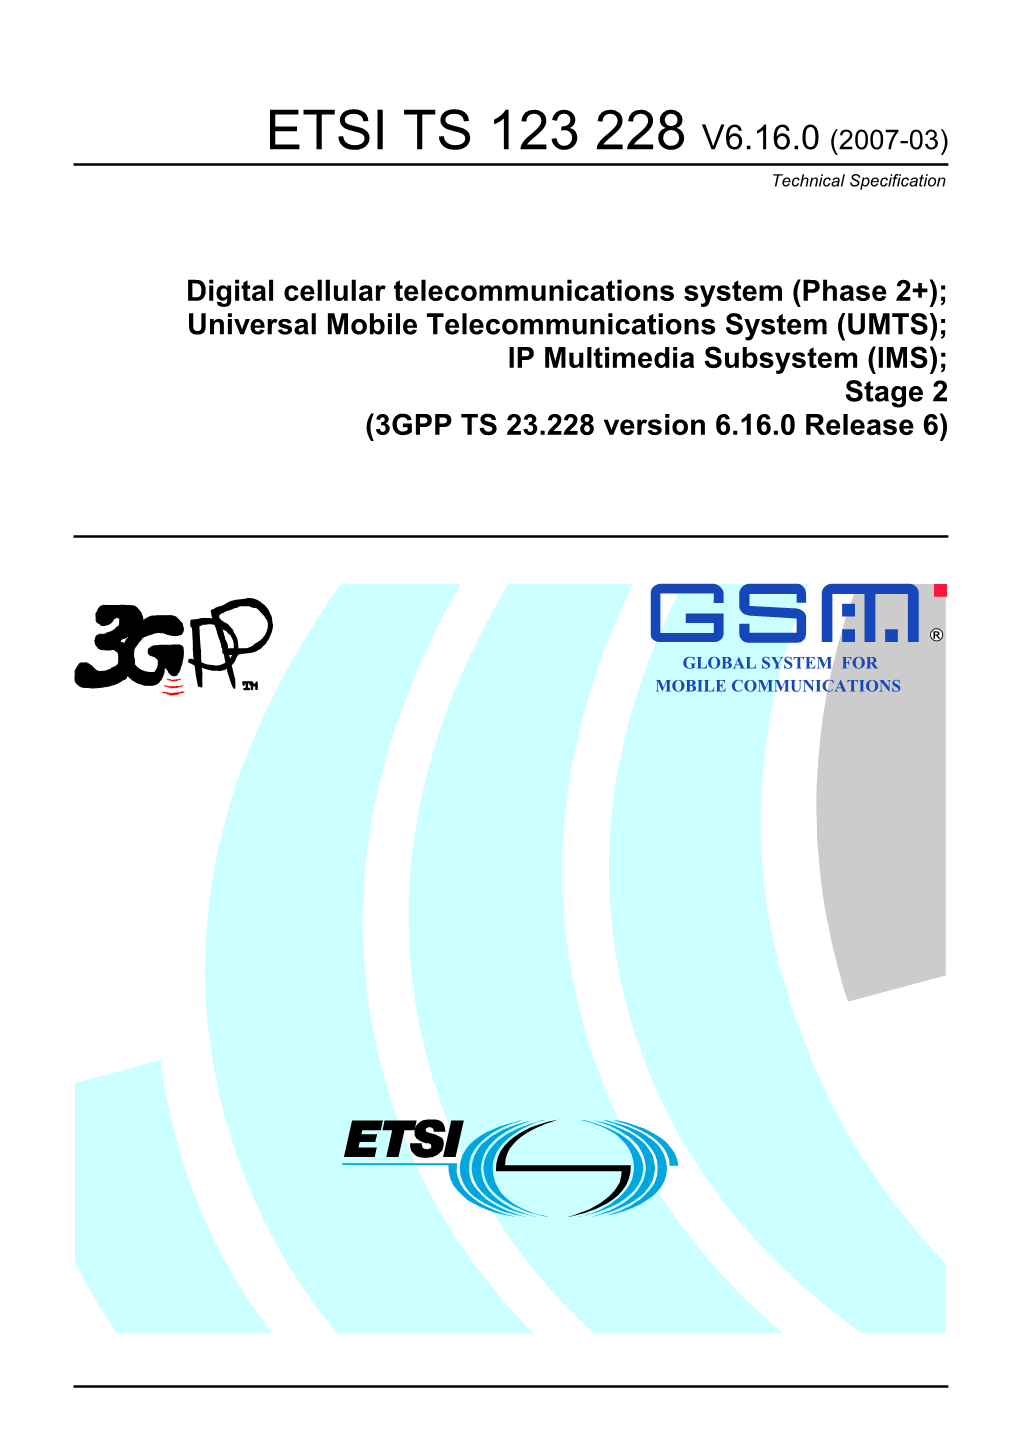 IP Multimedia Subsystem (IMS); Stage 2 (3GPP TS 23.228 Version 6.16.0 Release 6)